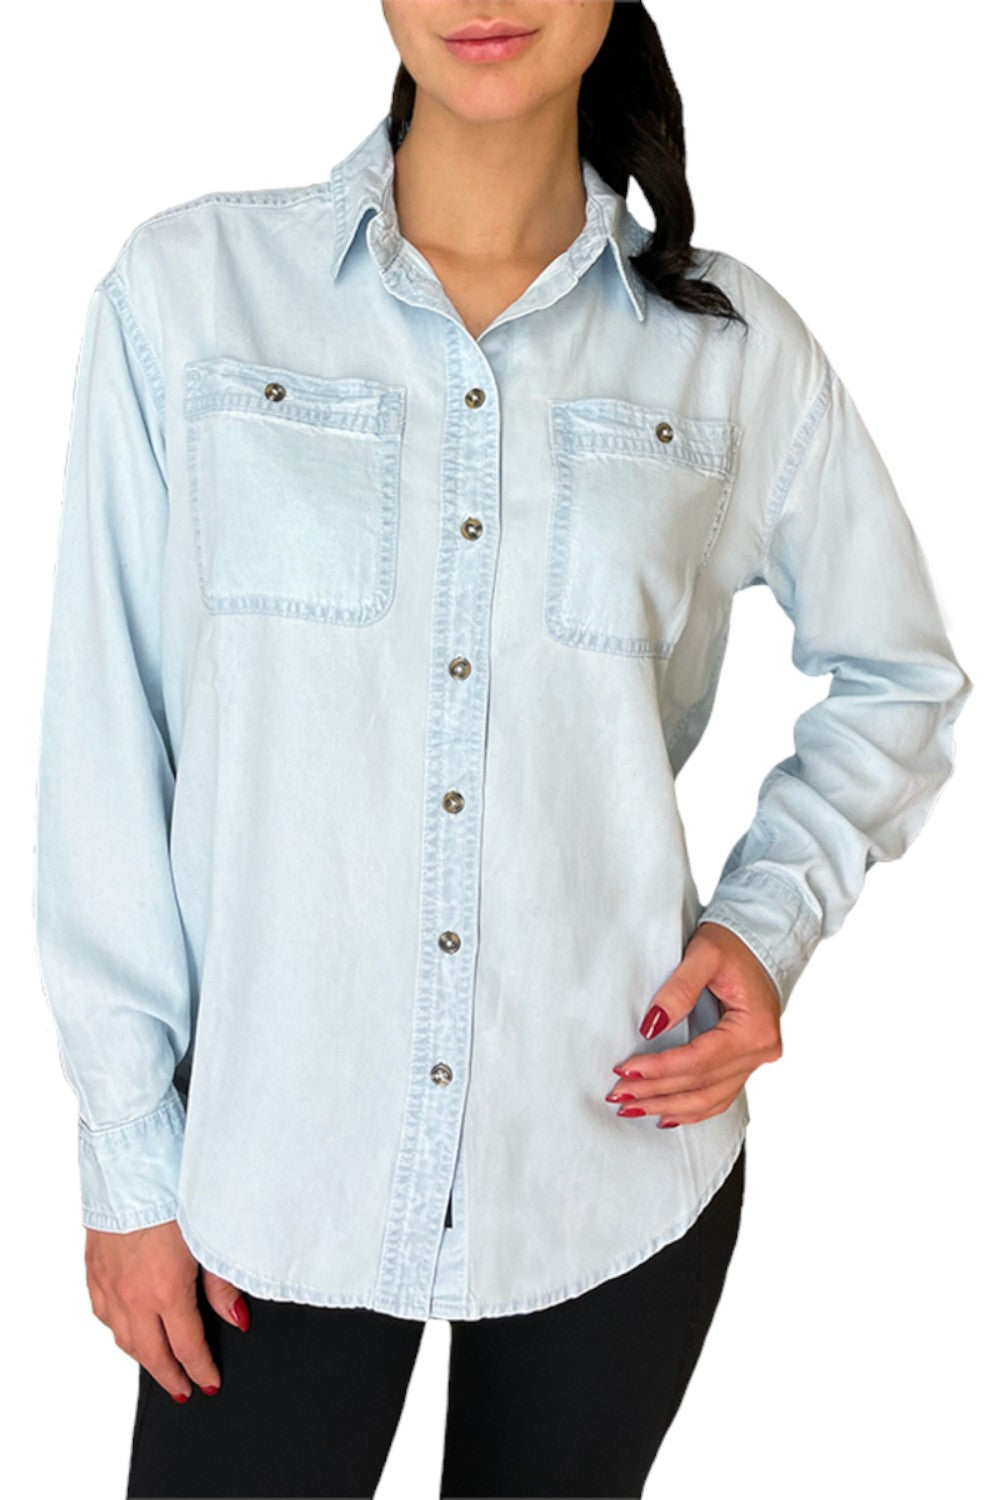 Women's Tops & Blouses – Tagged Notch Neck – Broderick's Clothing Co.